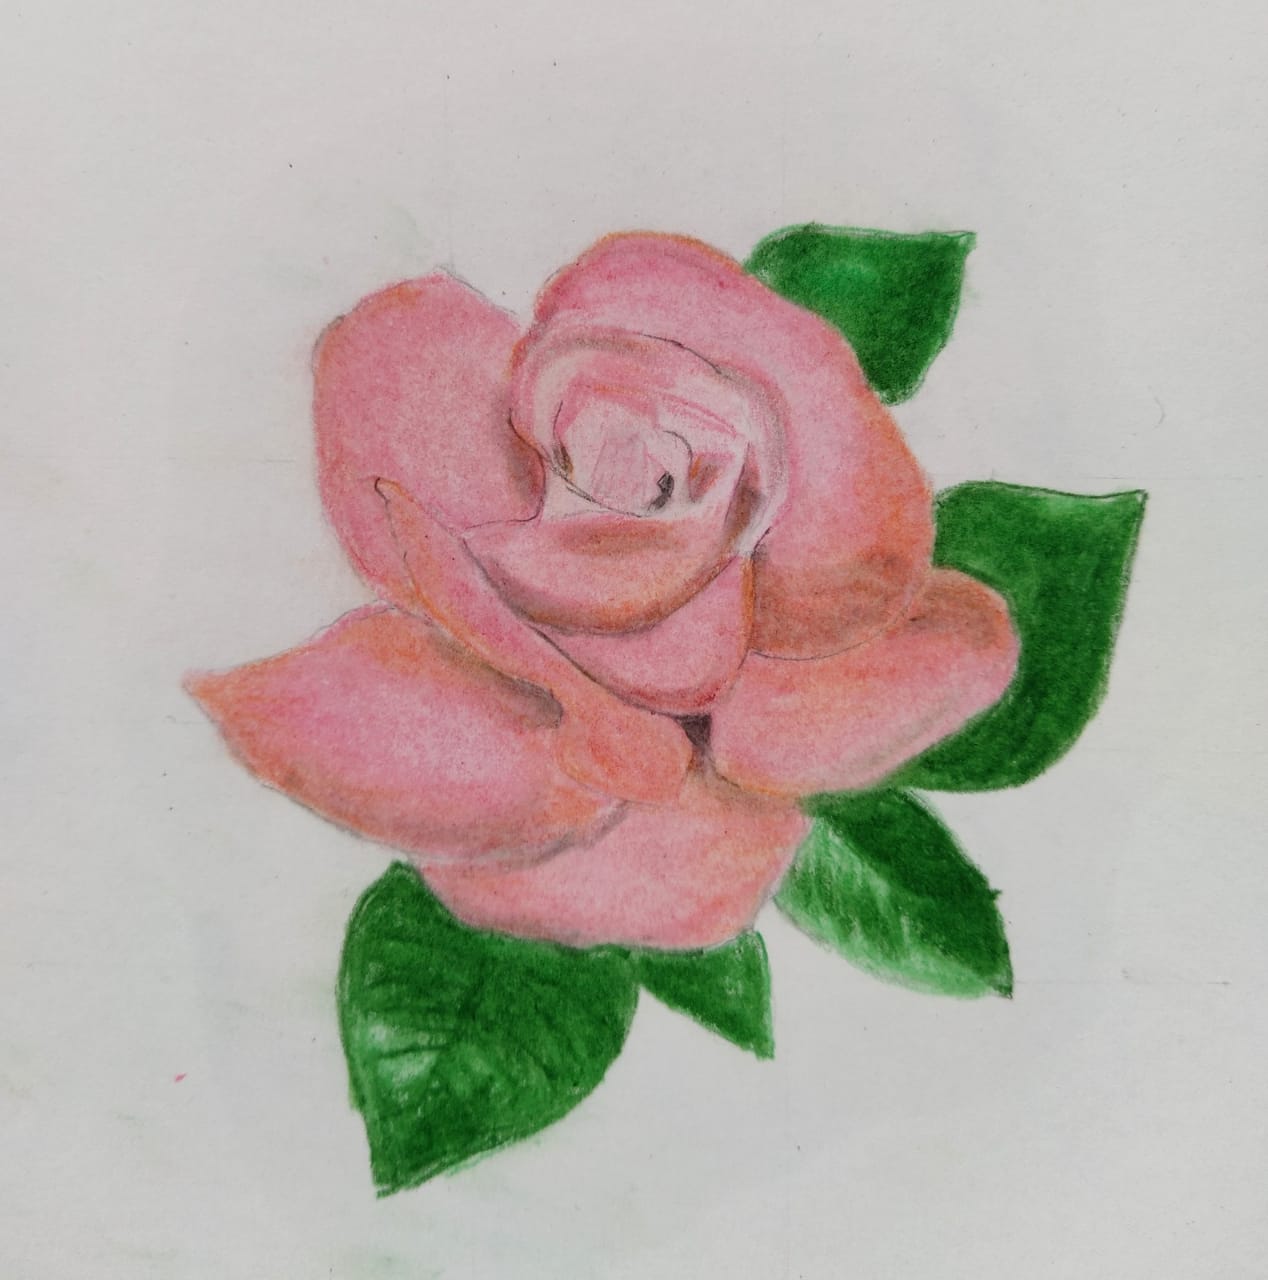 How To Draw A Rose Step By Step For Kids | The Ravi arts